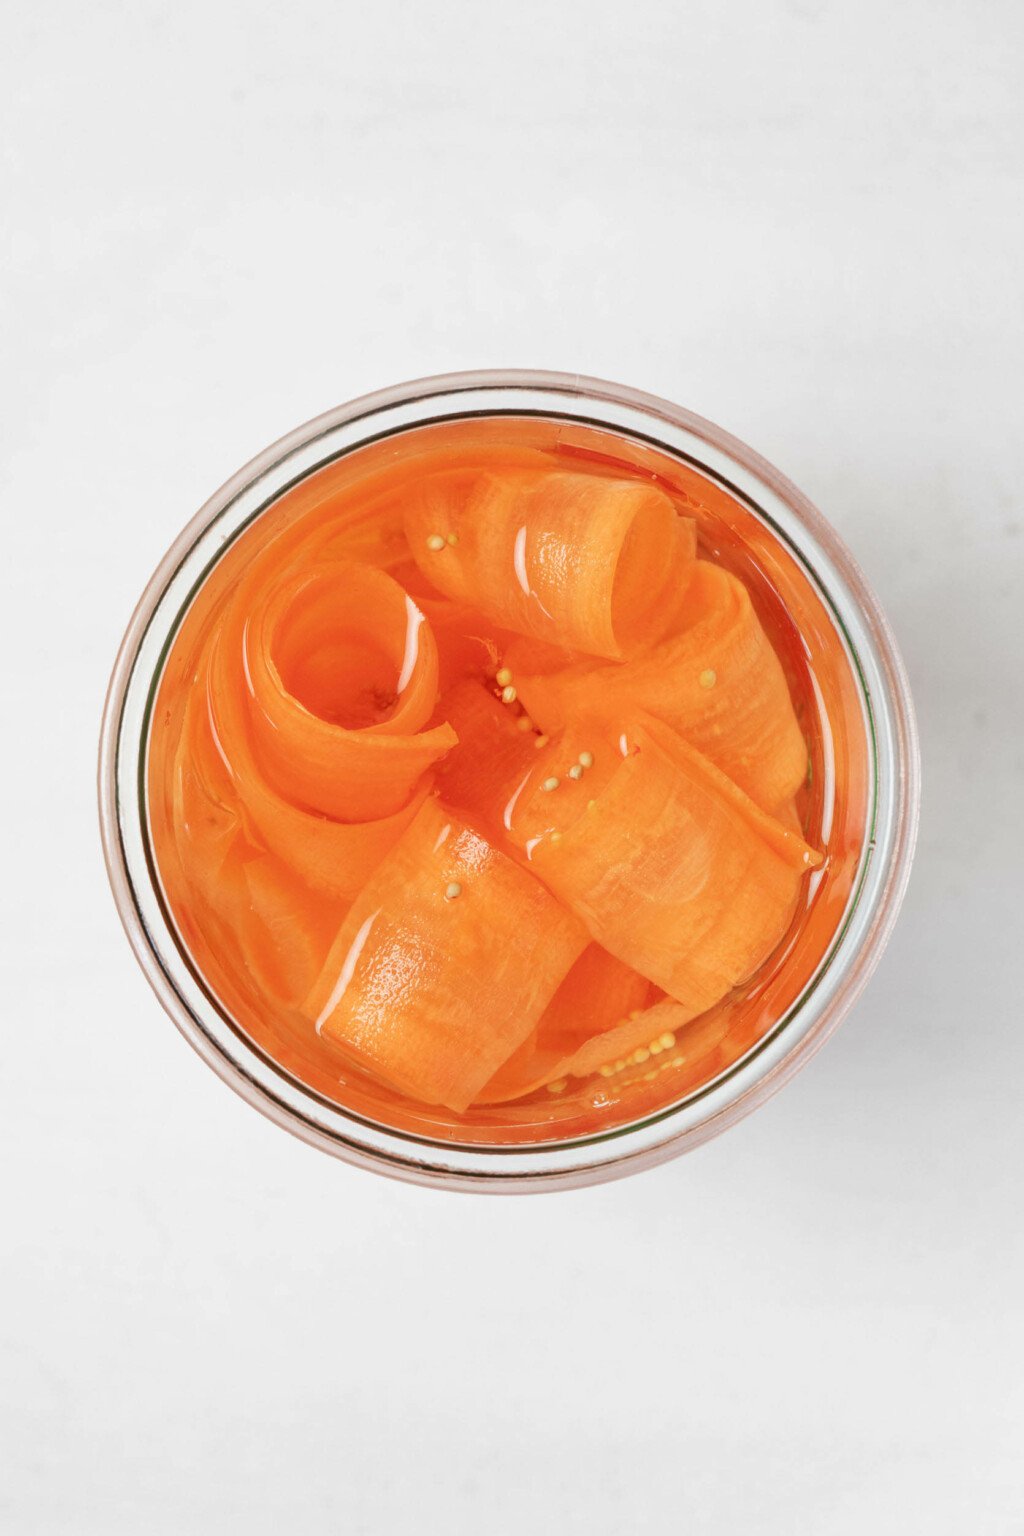 An overhead image of a glass jar containing pickled carrot ribbons. It rests on a white surface.